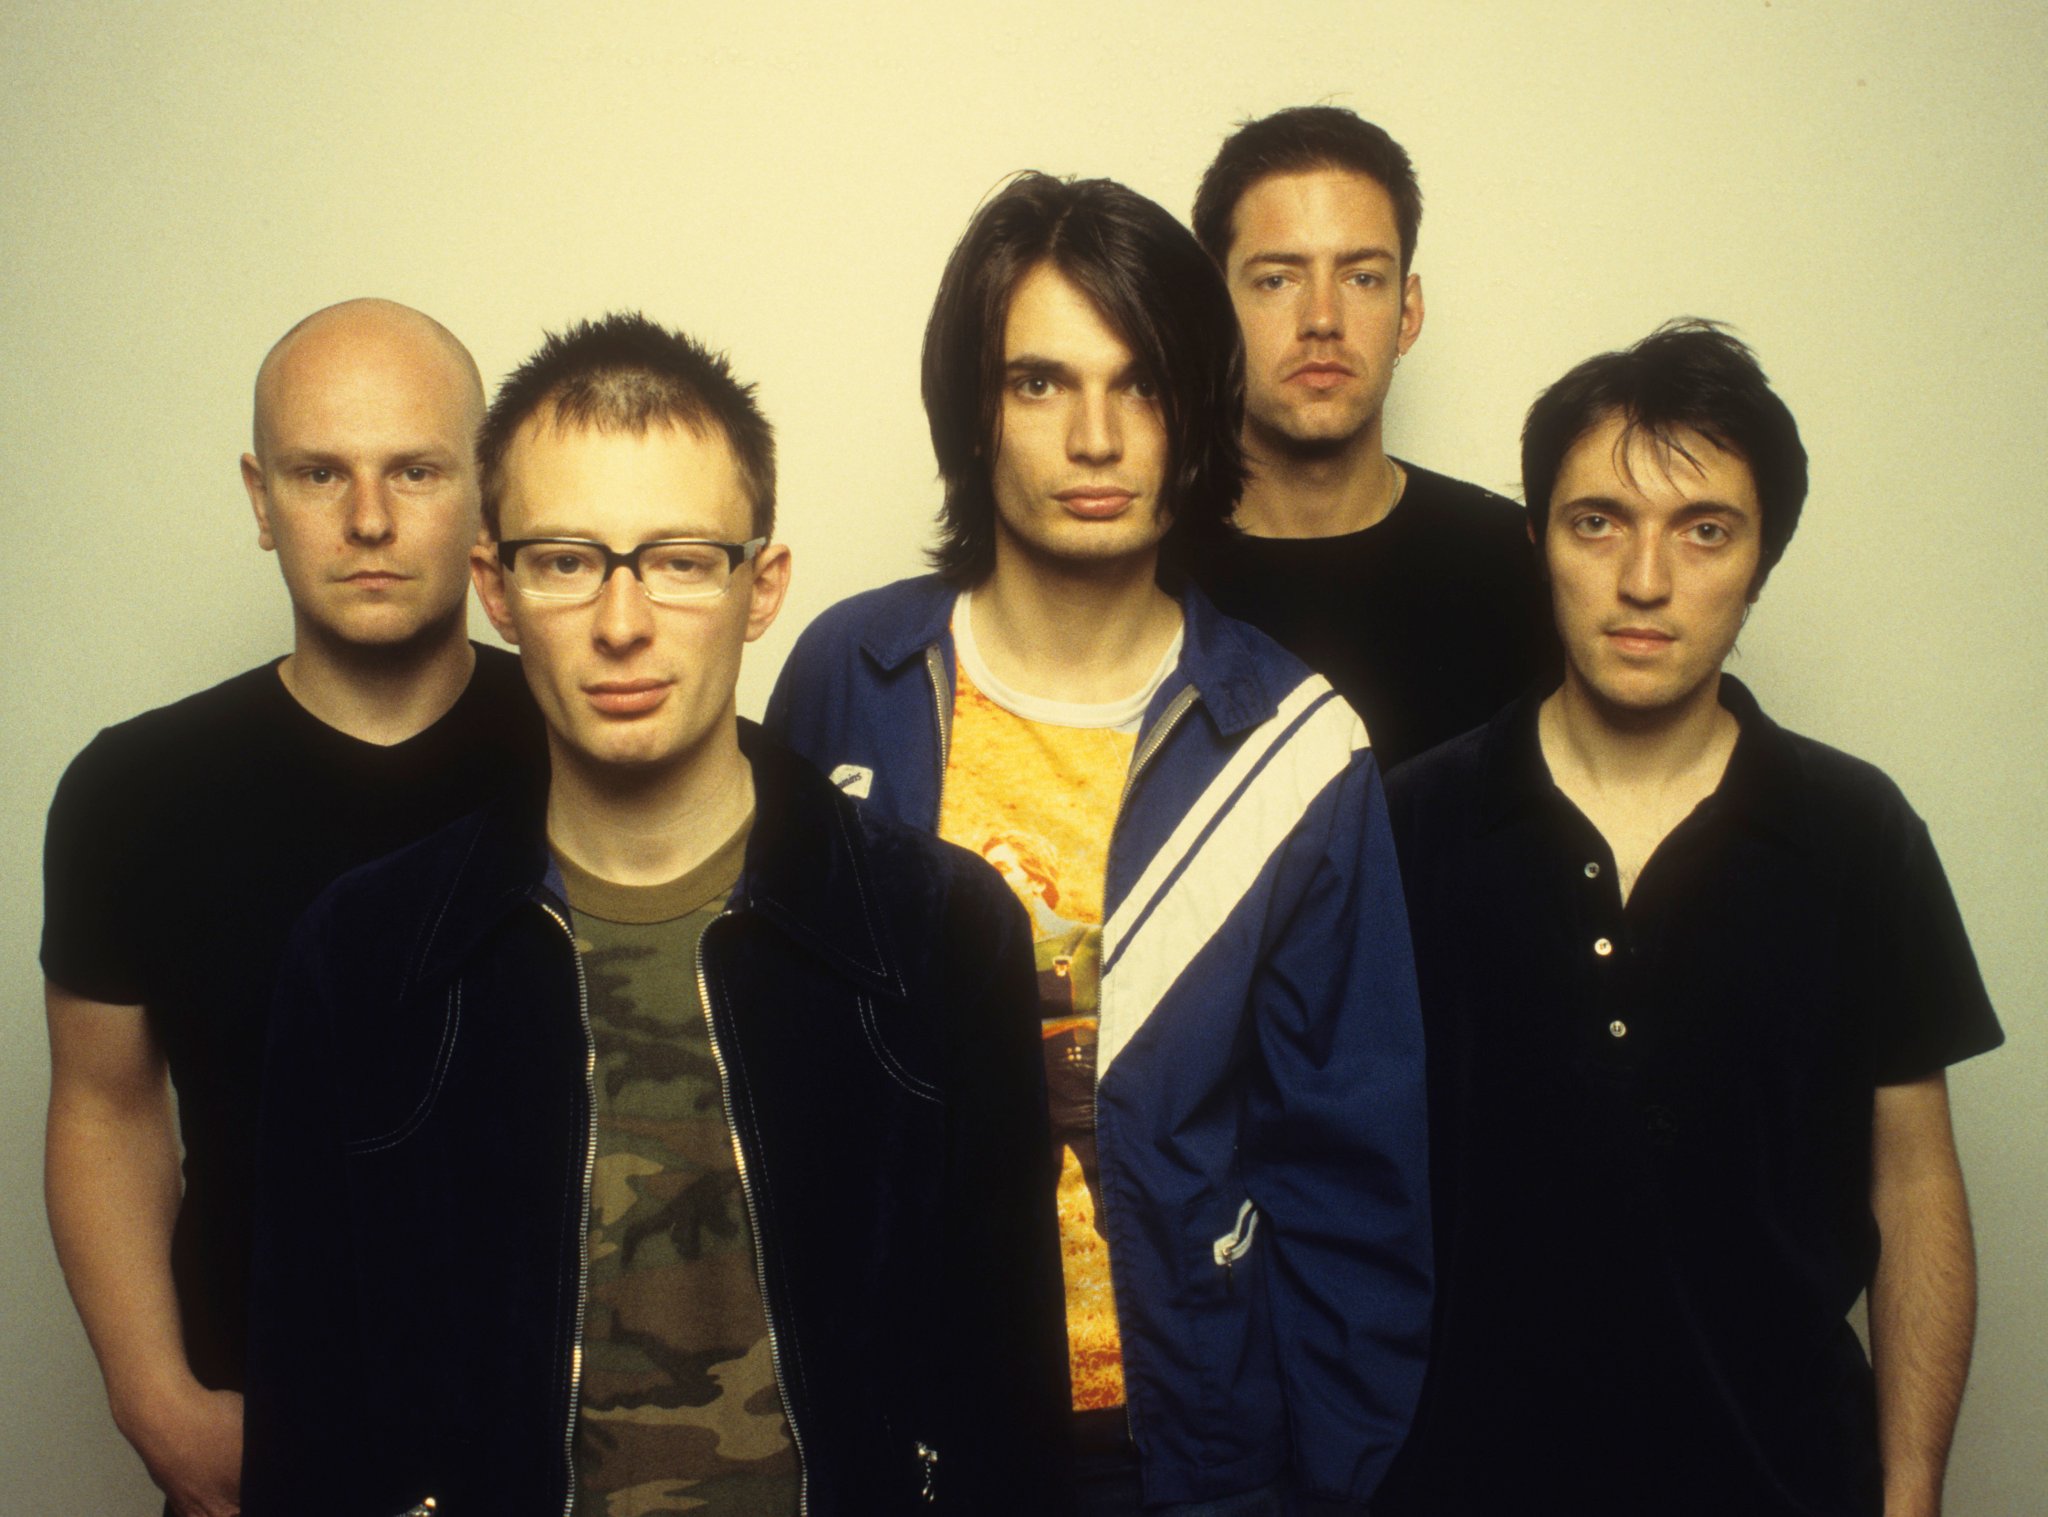 The Most Influential Artists: #22 Radiohead